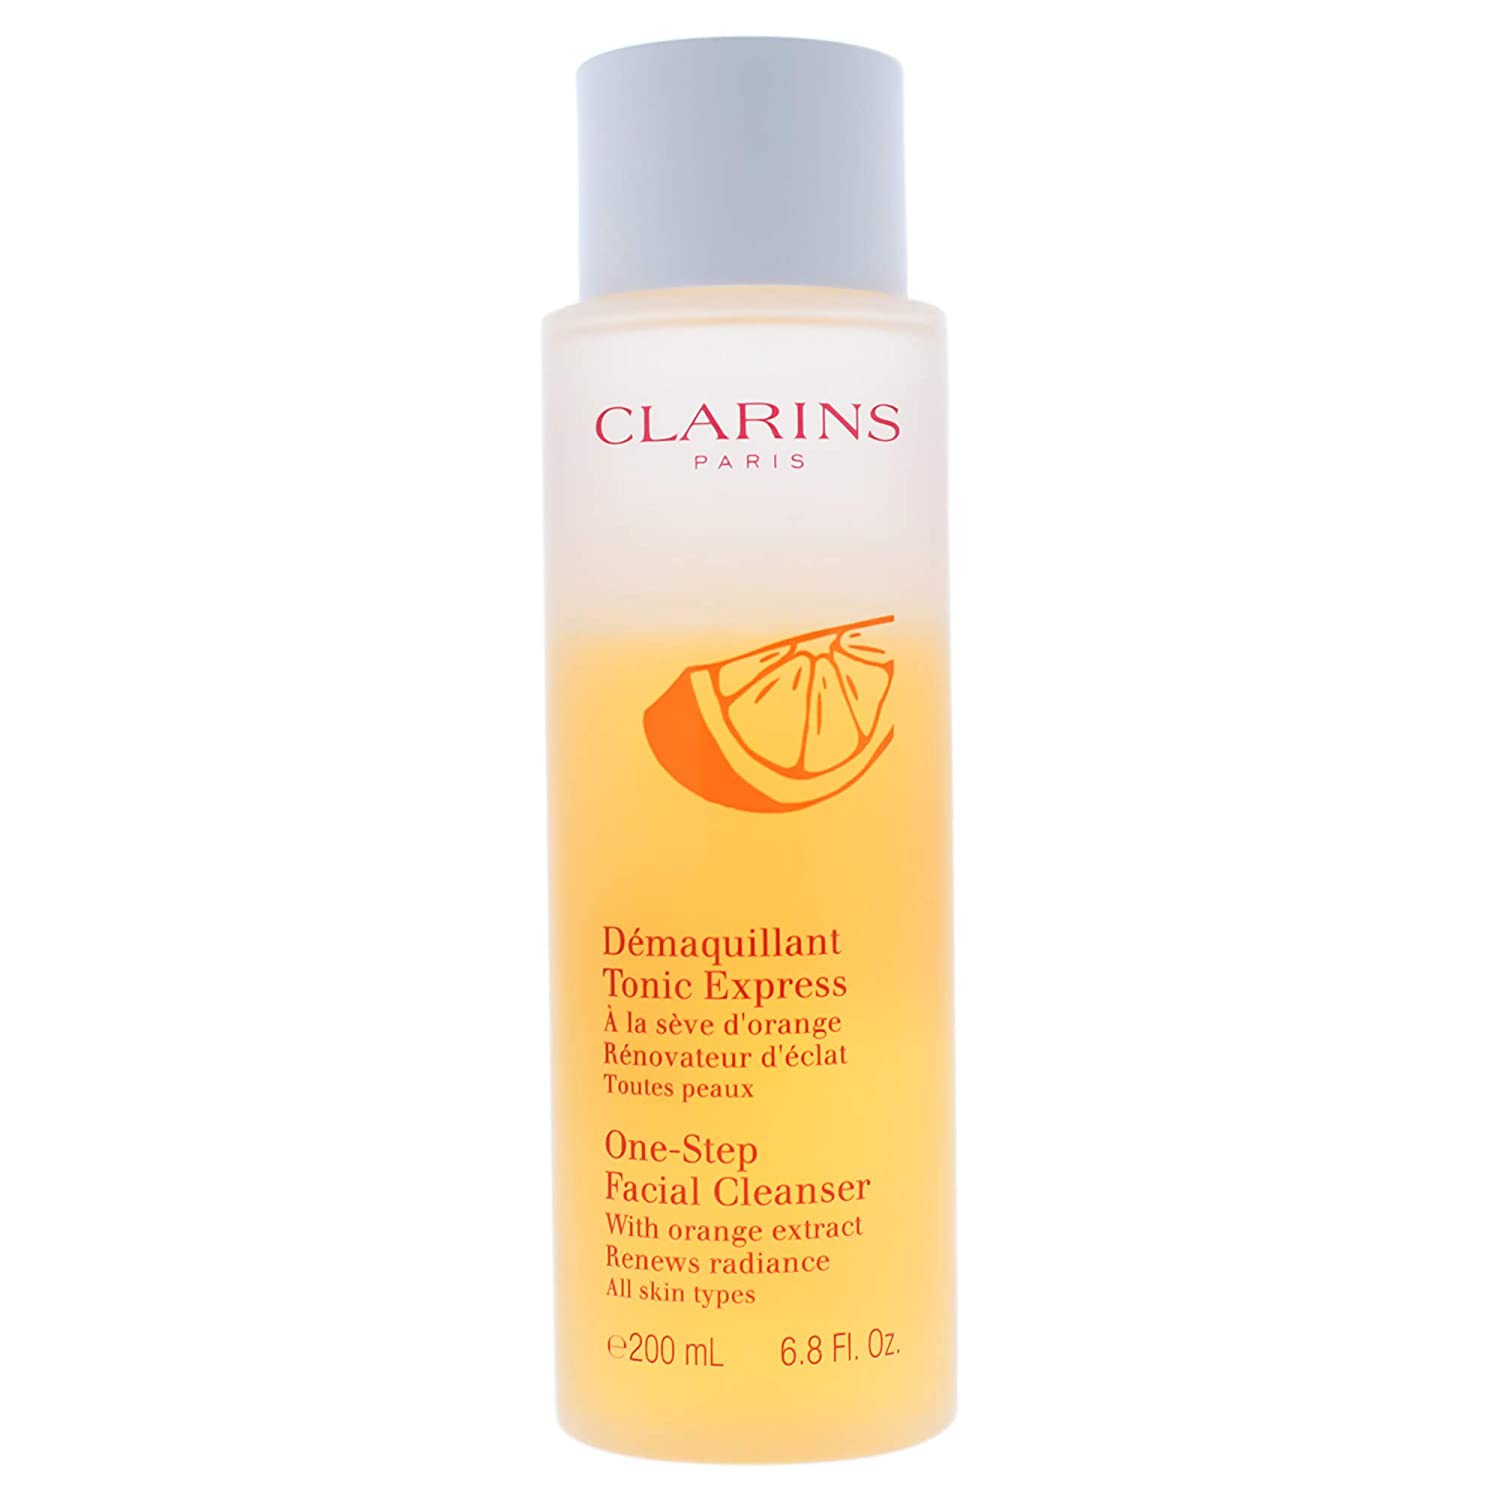 WHOLESALE CLARINS ONE-STEP GENTLE EXFOLIATING CLEANSER WITH ORANGE EXTRACT 6.7 OZ - 48 PIECE LOT